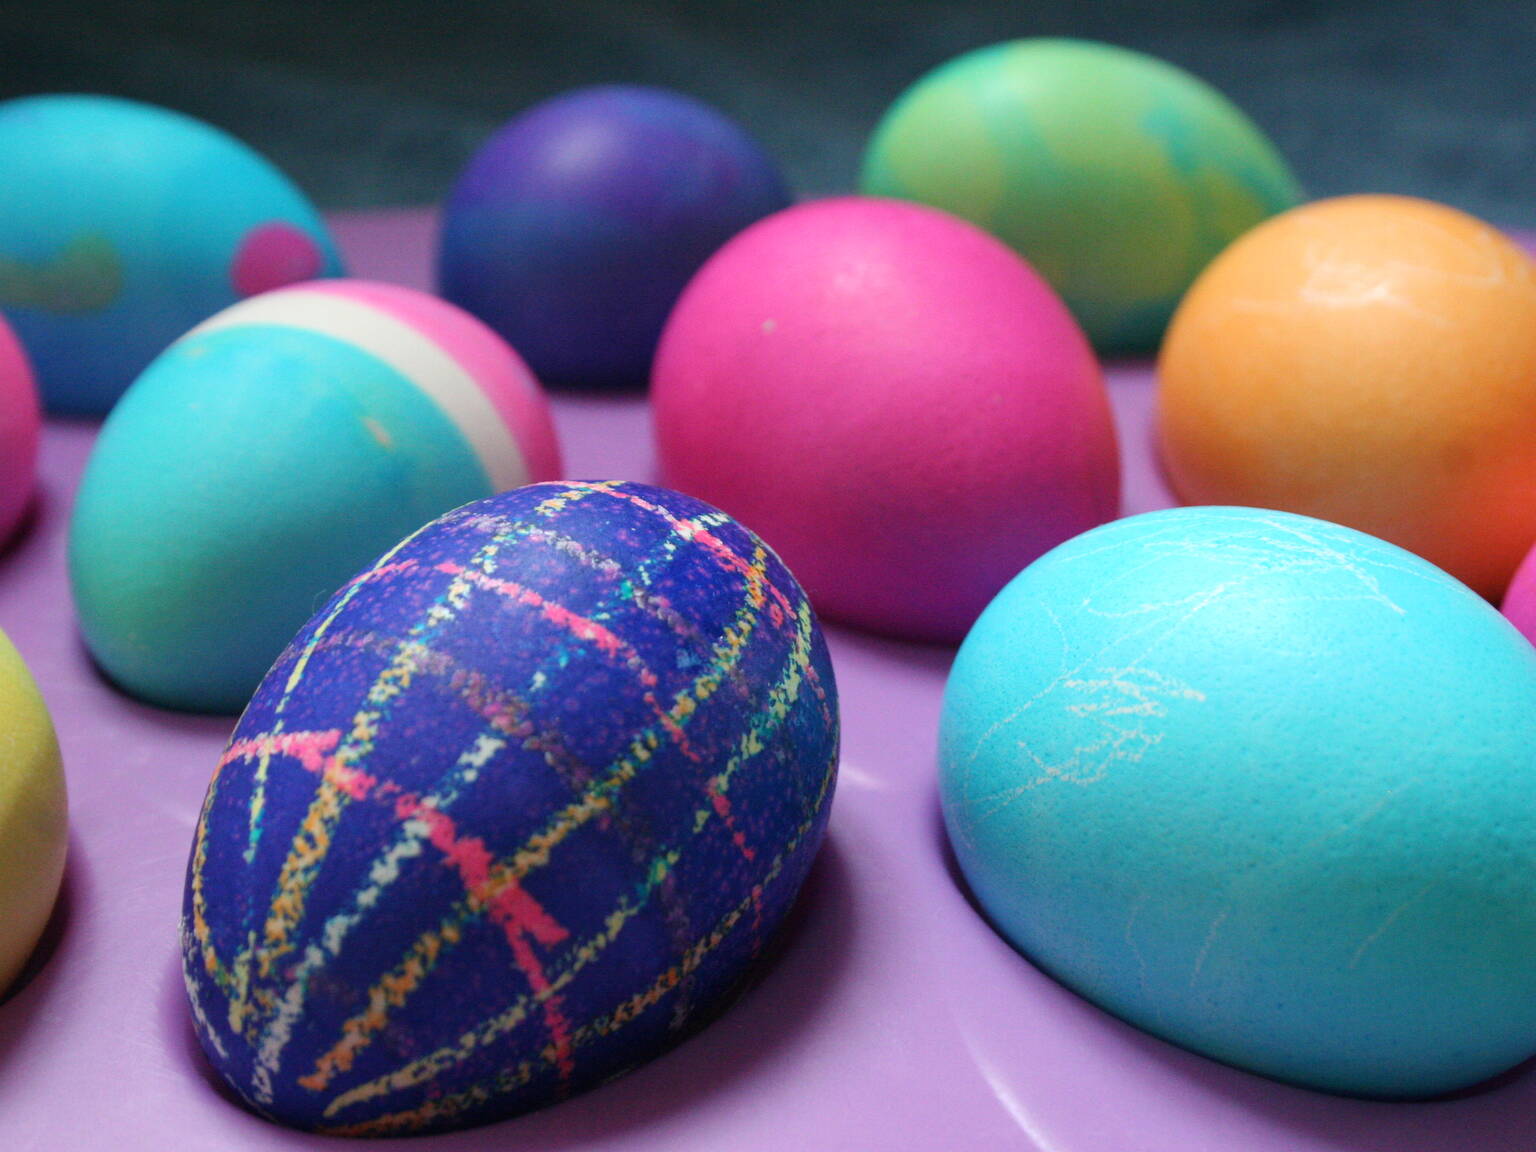 Best Things to do for Easter in NYC Including egg hunts and parades